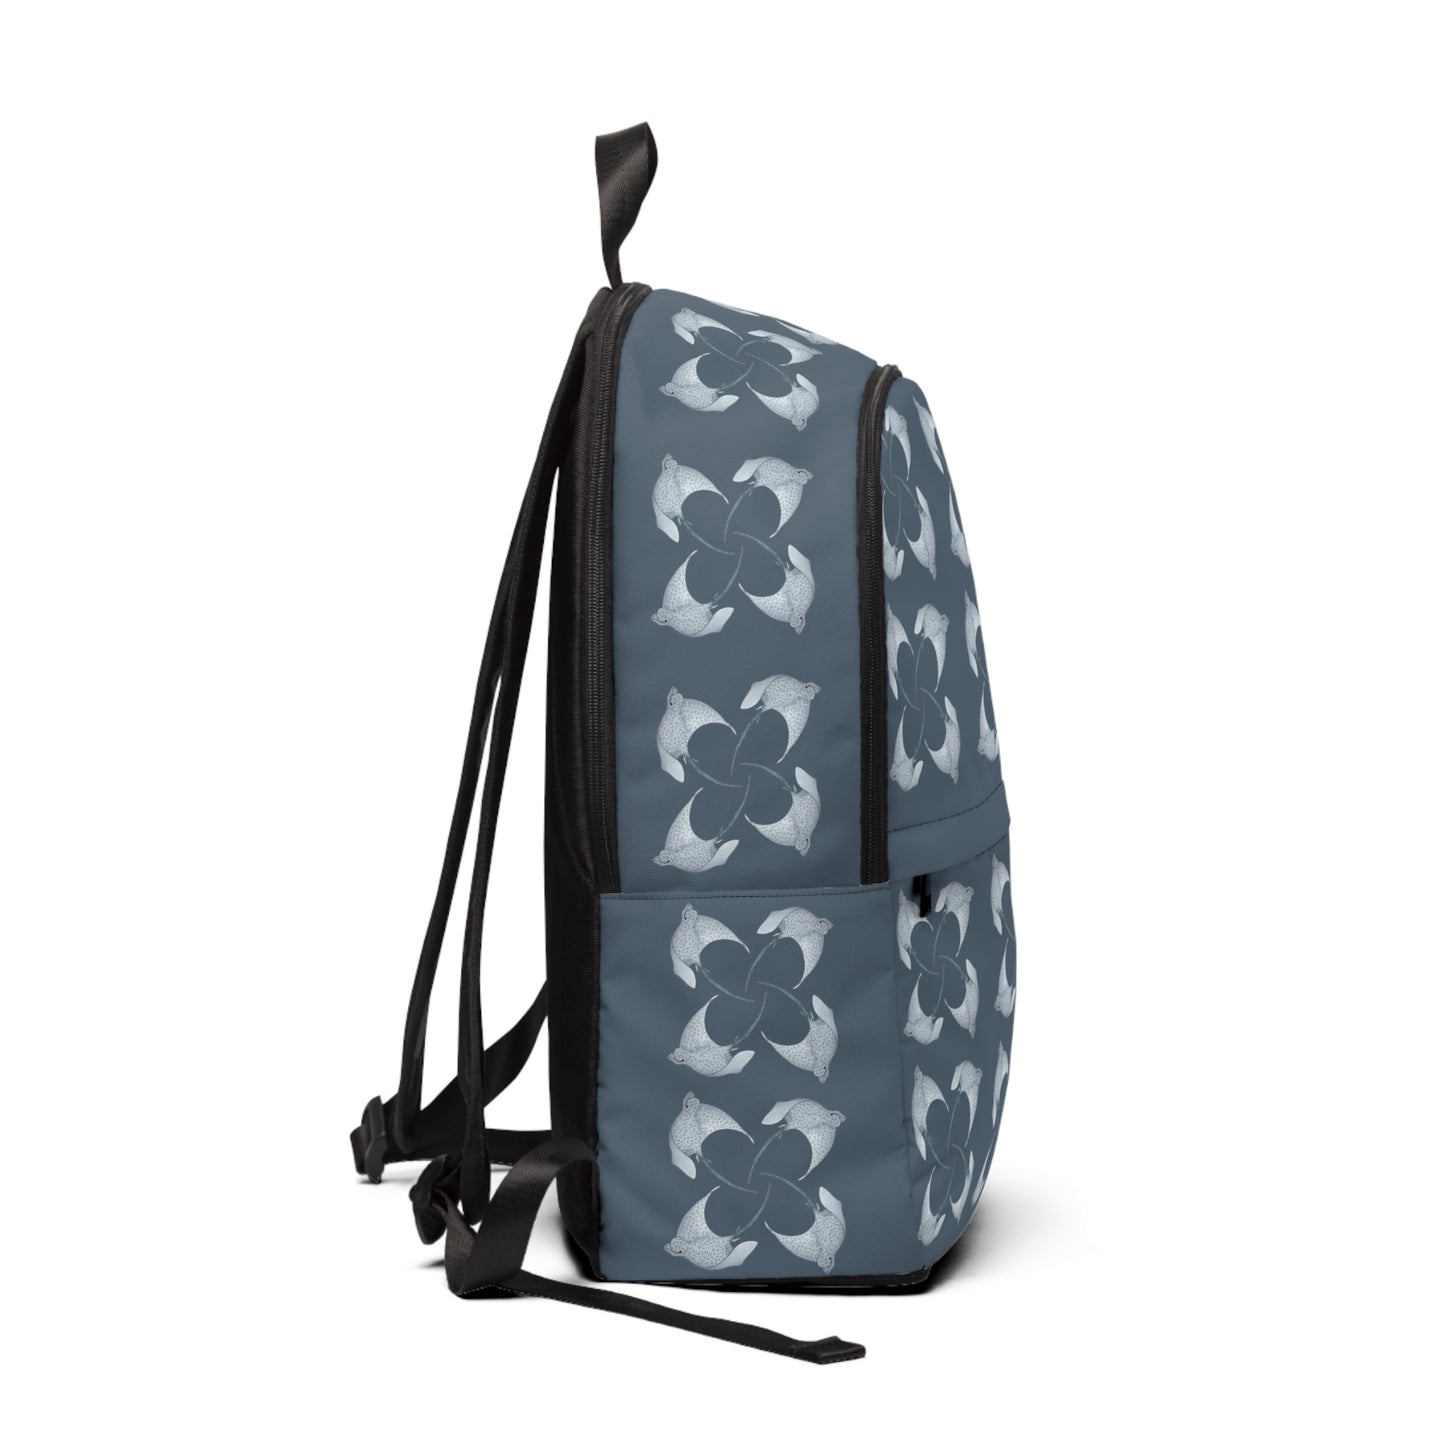 Sargasso Sea- Fabric Backpack - Charcoal